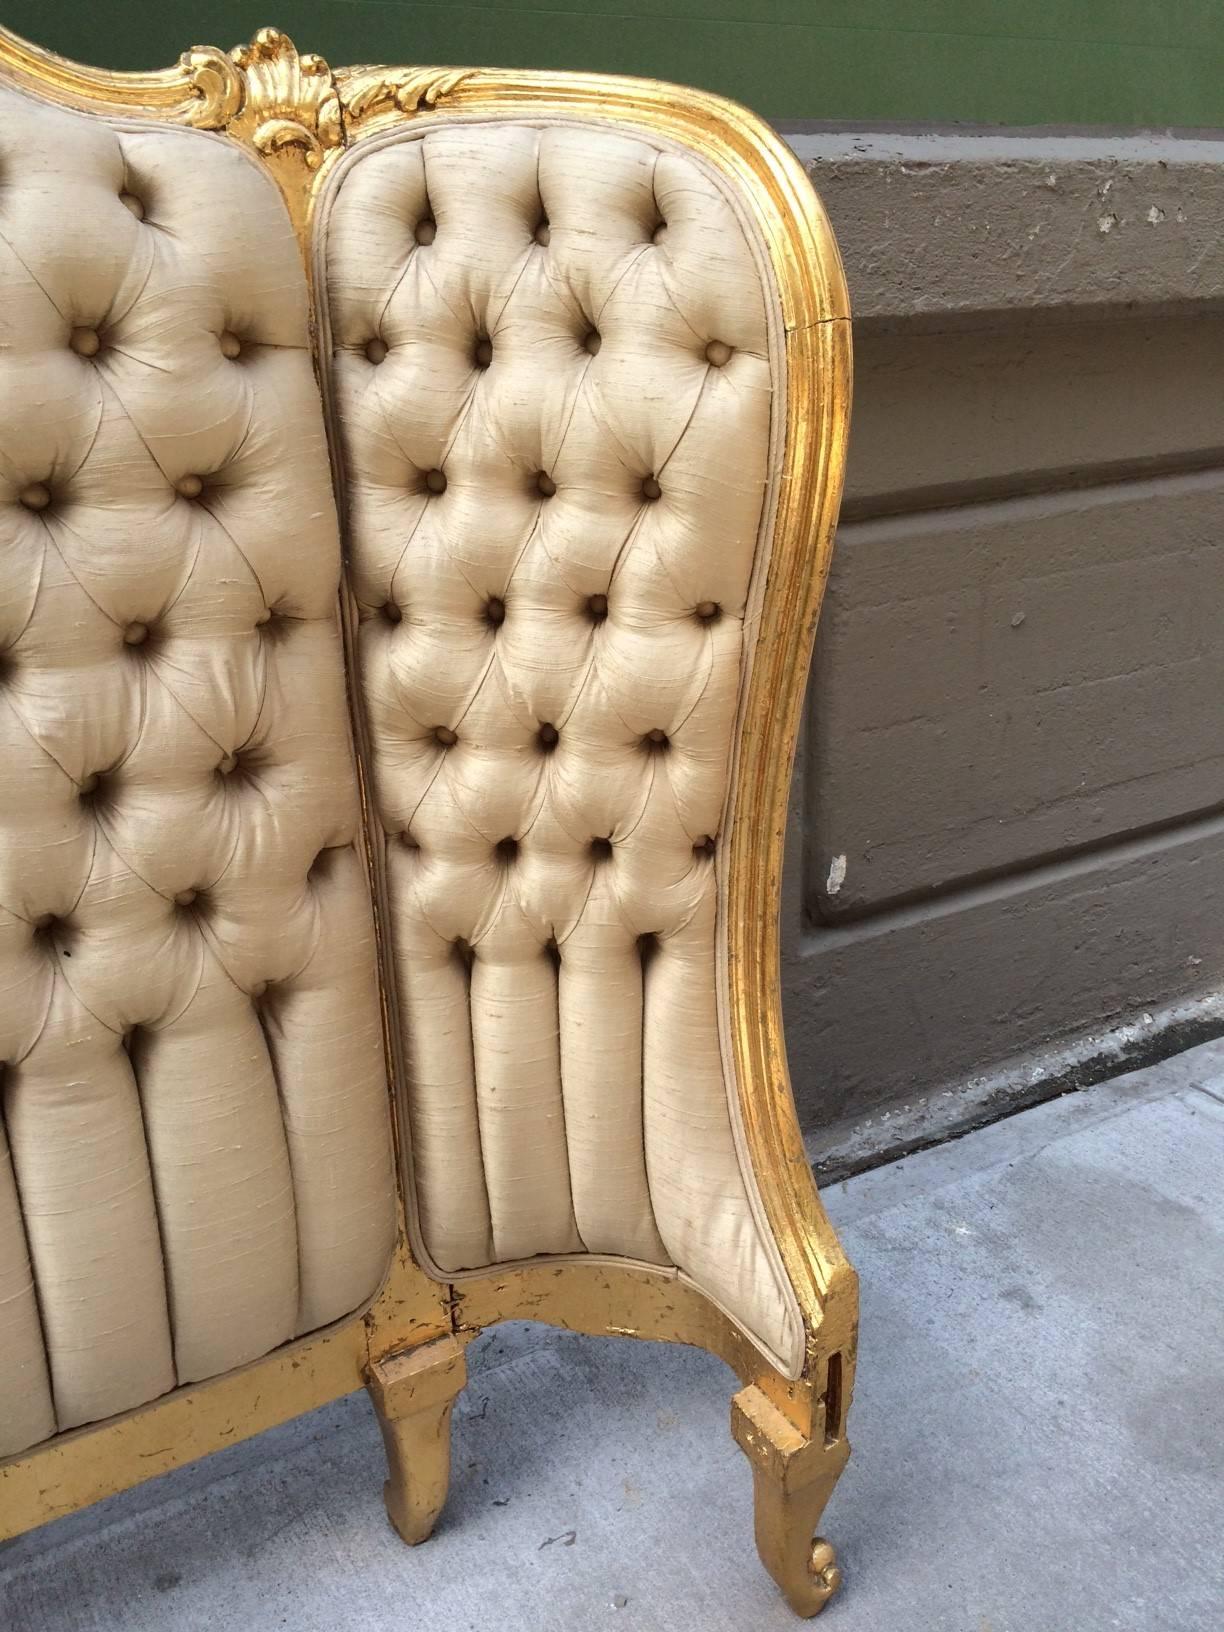 Louis XV style tufted gilt headboard.
Entire measurements:  48.5"H x 57"W x 14"D
From hole to hole:  55"W 